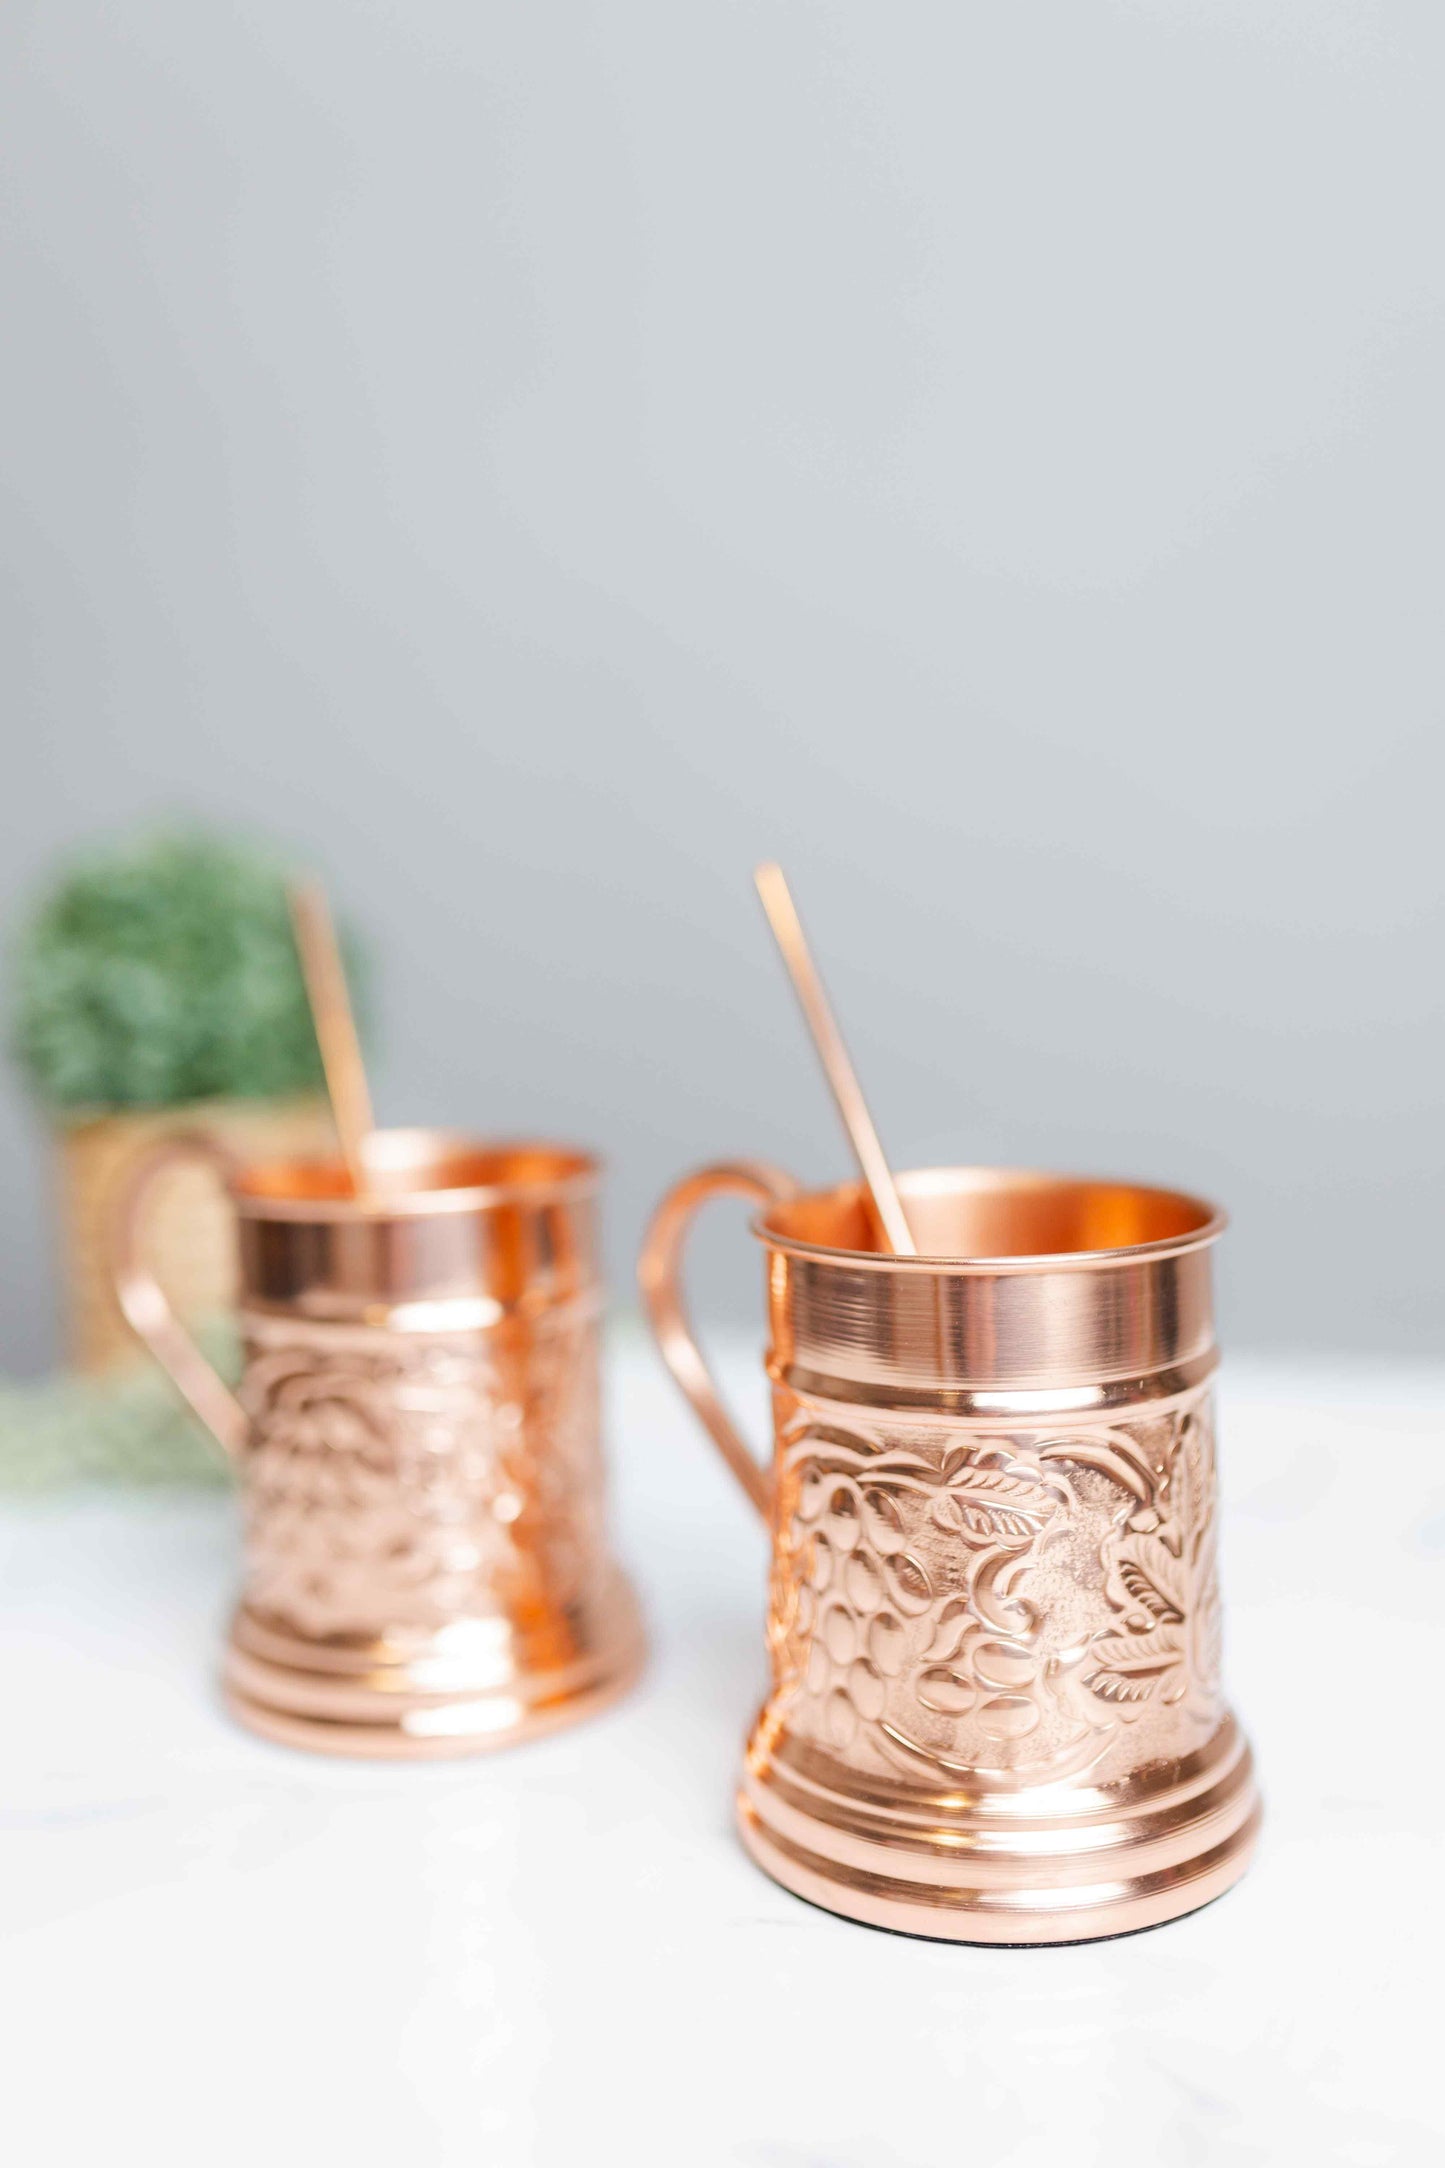 Embossed Copper Mule Mug - 500ml (Set of 2) with 2 Copper Straws - copperdirect